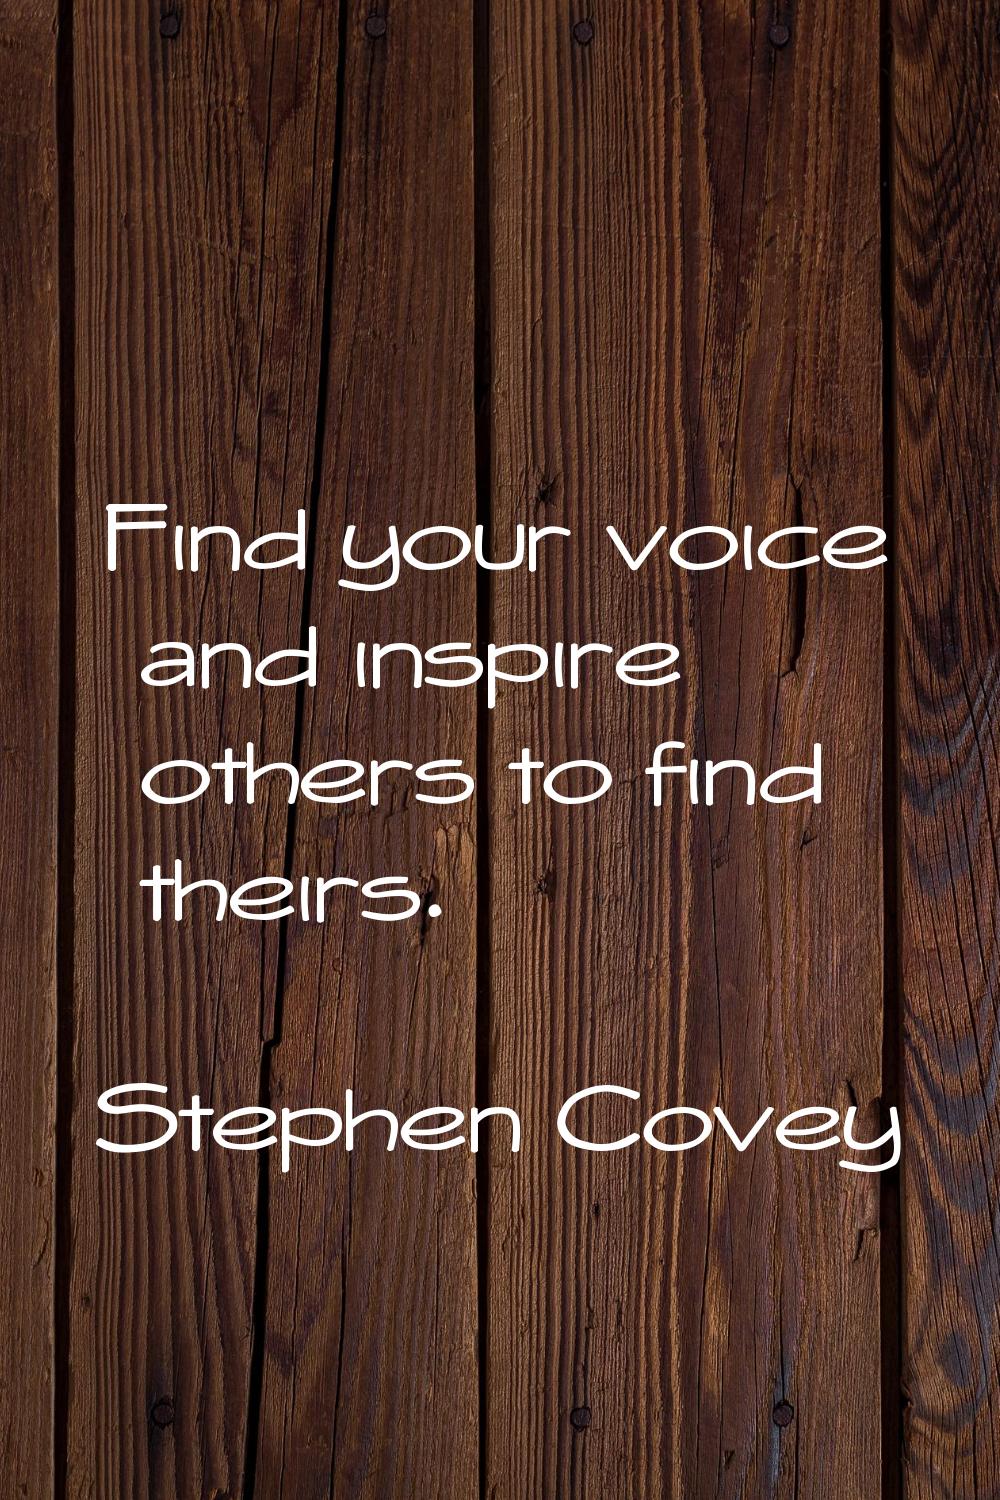 Find your voice and inspire others to find theirs.